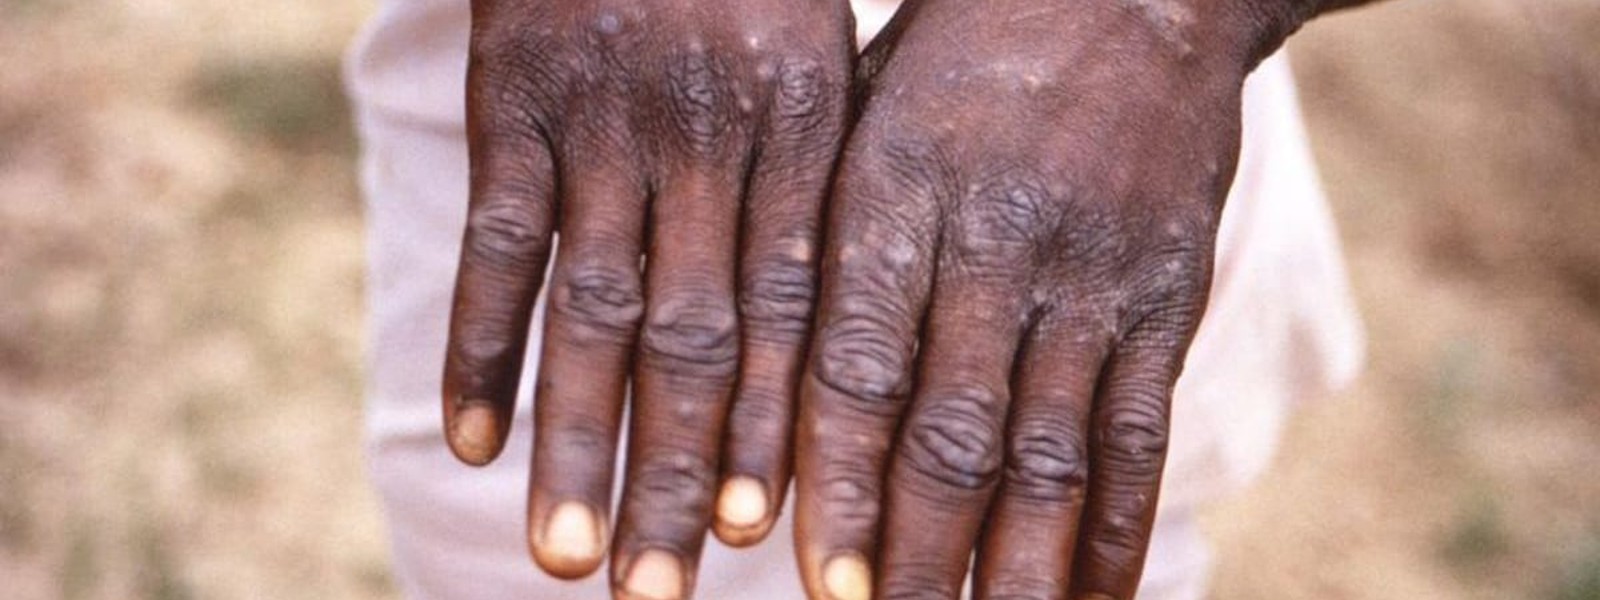 Health sector assures it is prepared for monkeypox testing